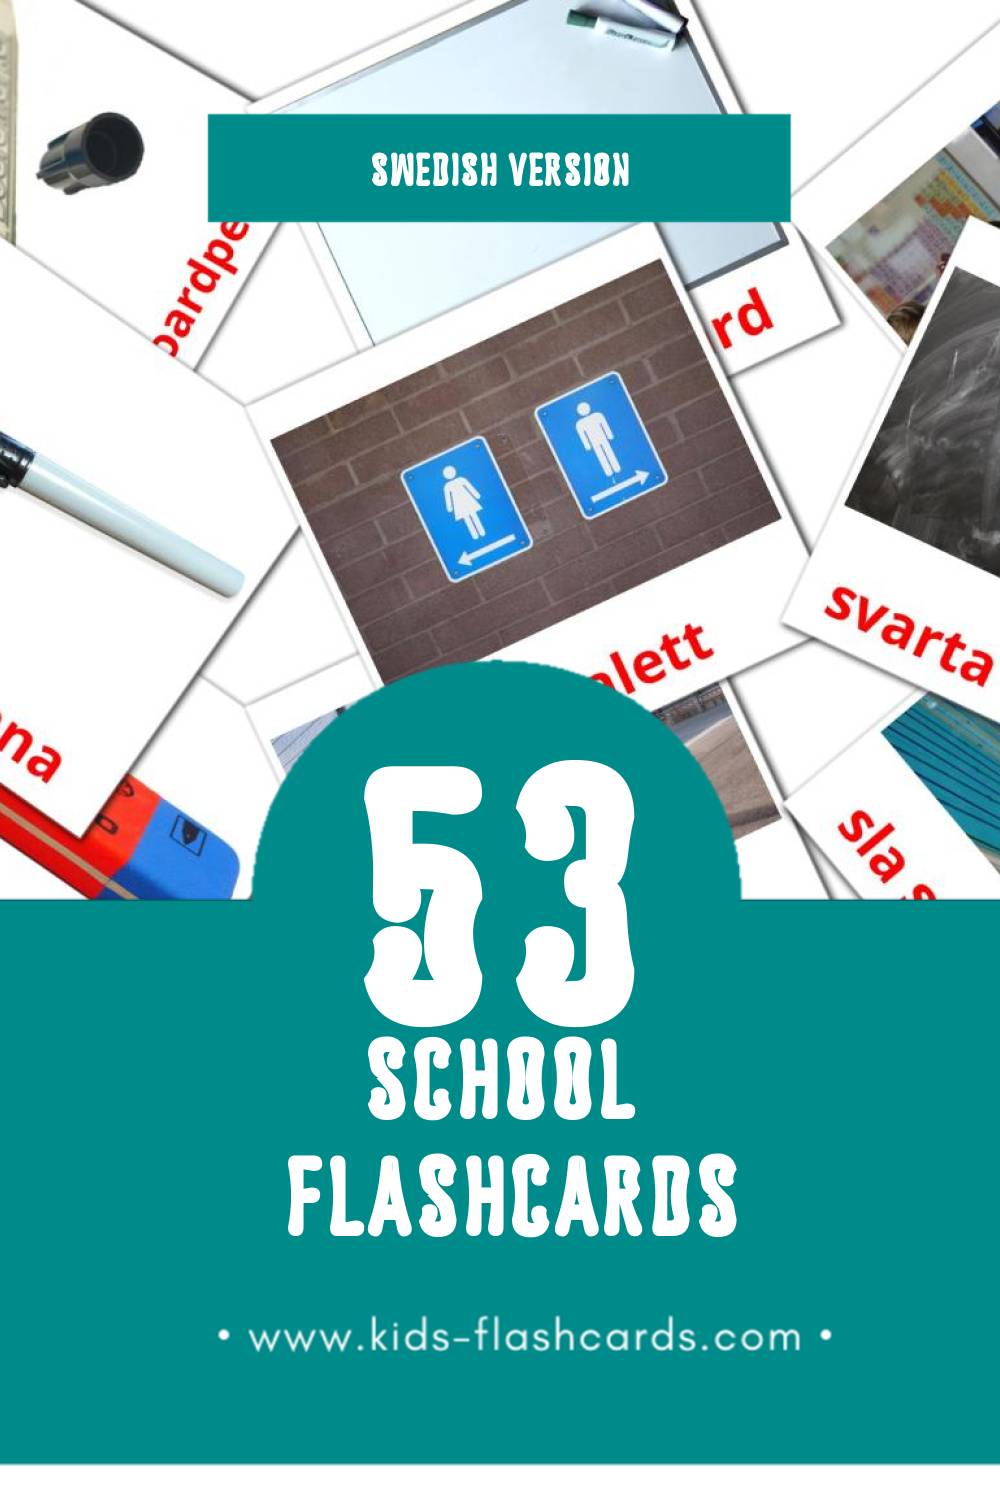 Visual Skola Flashcards for Toddlers (53 cards in Swedish)